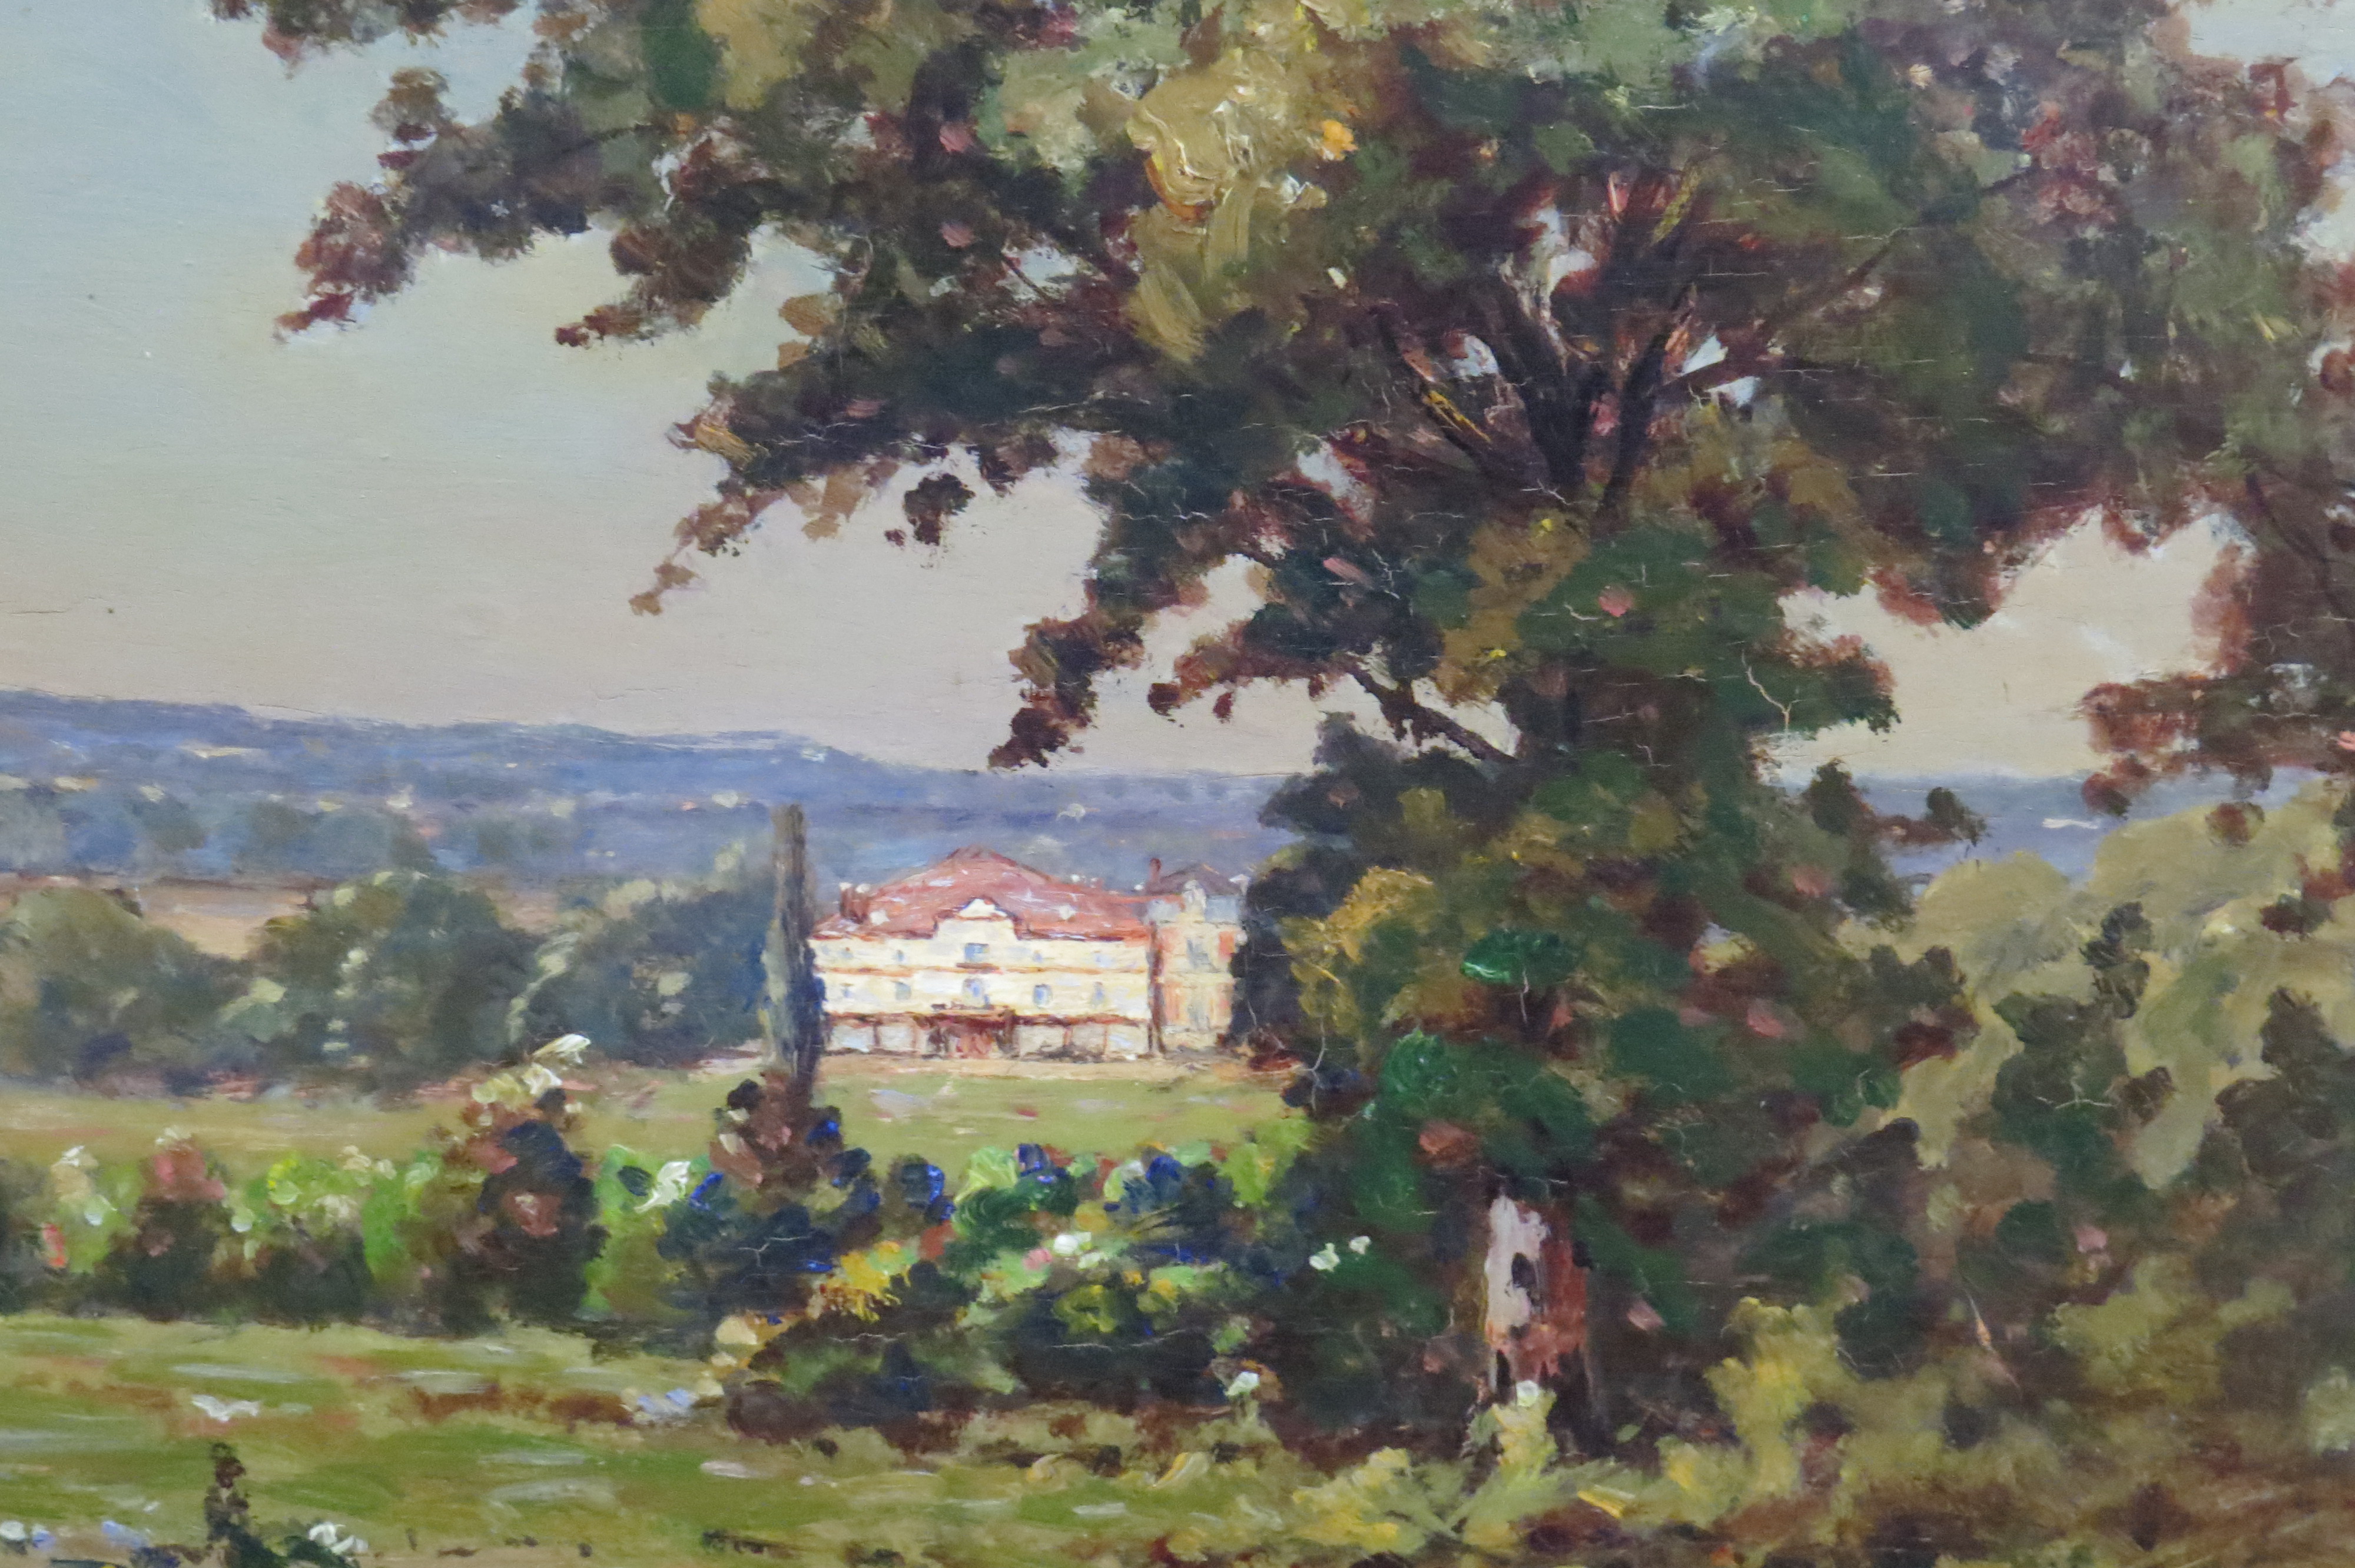 Oil on Panel of “View of a Chateau in the French Countryside” by French artist, J. Louis Verdie